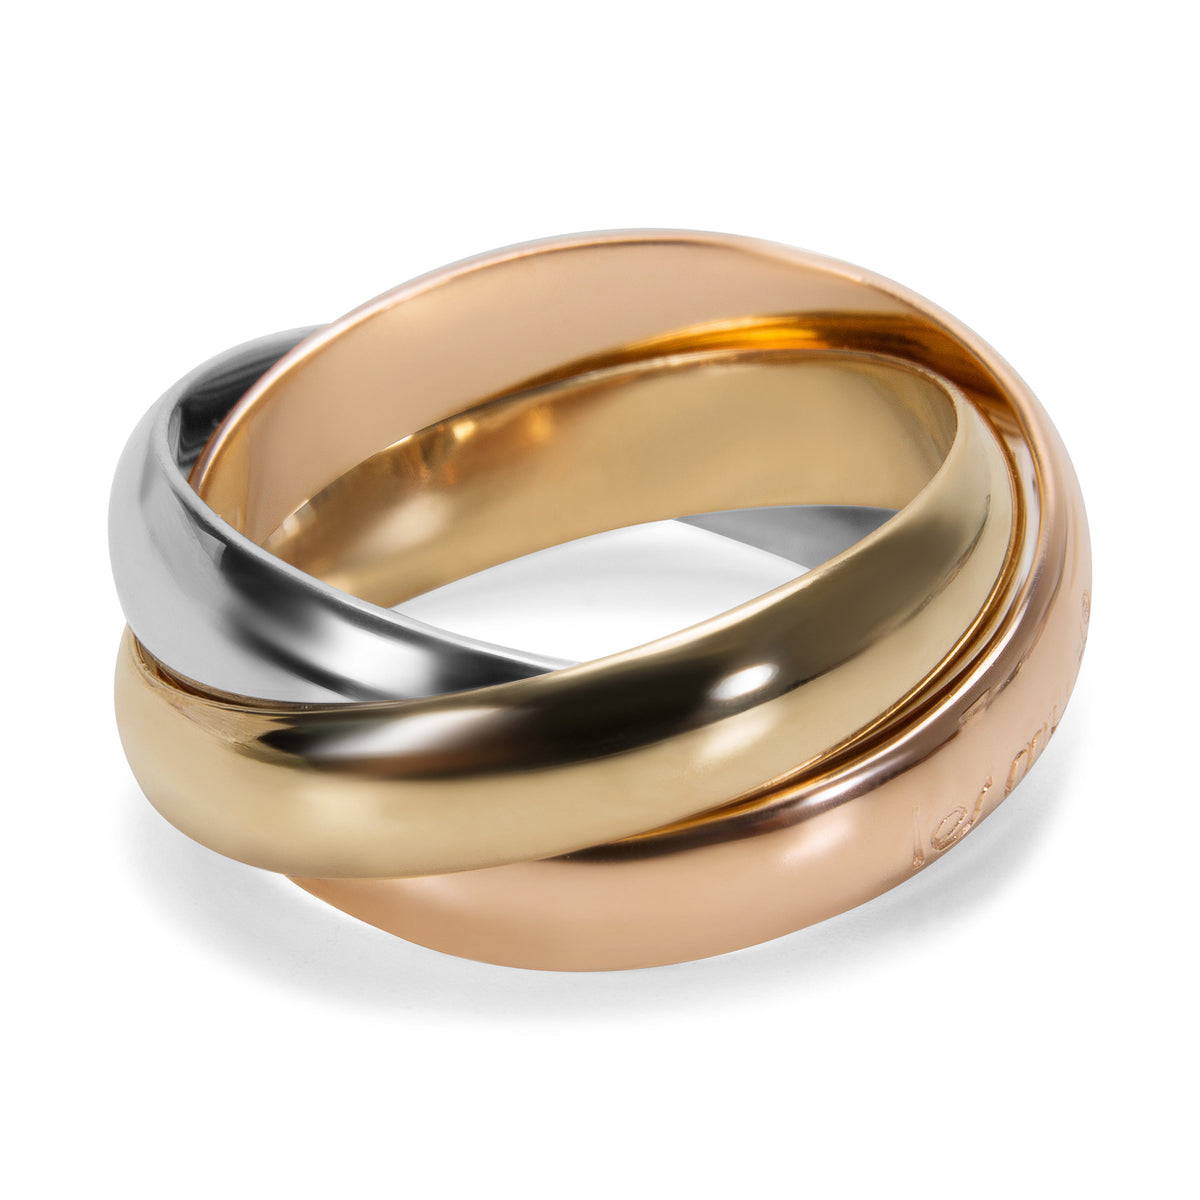 Cartier Les Must de Cartier Trinity Ring in 18K Yellow, White & Rose Gold